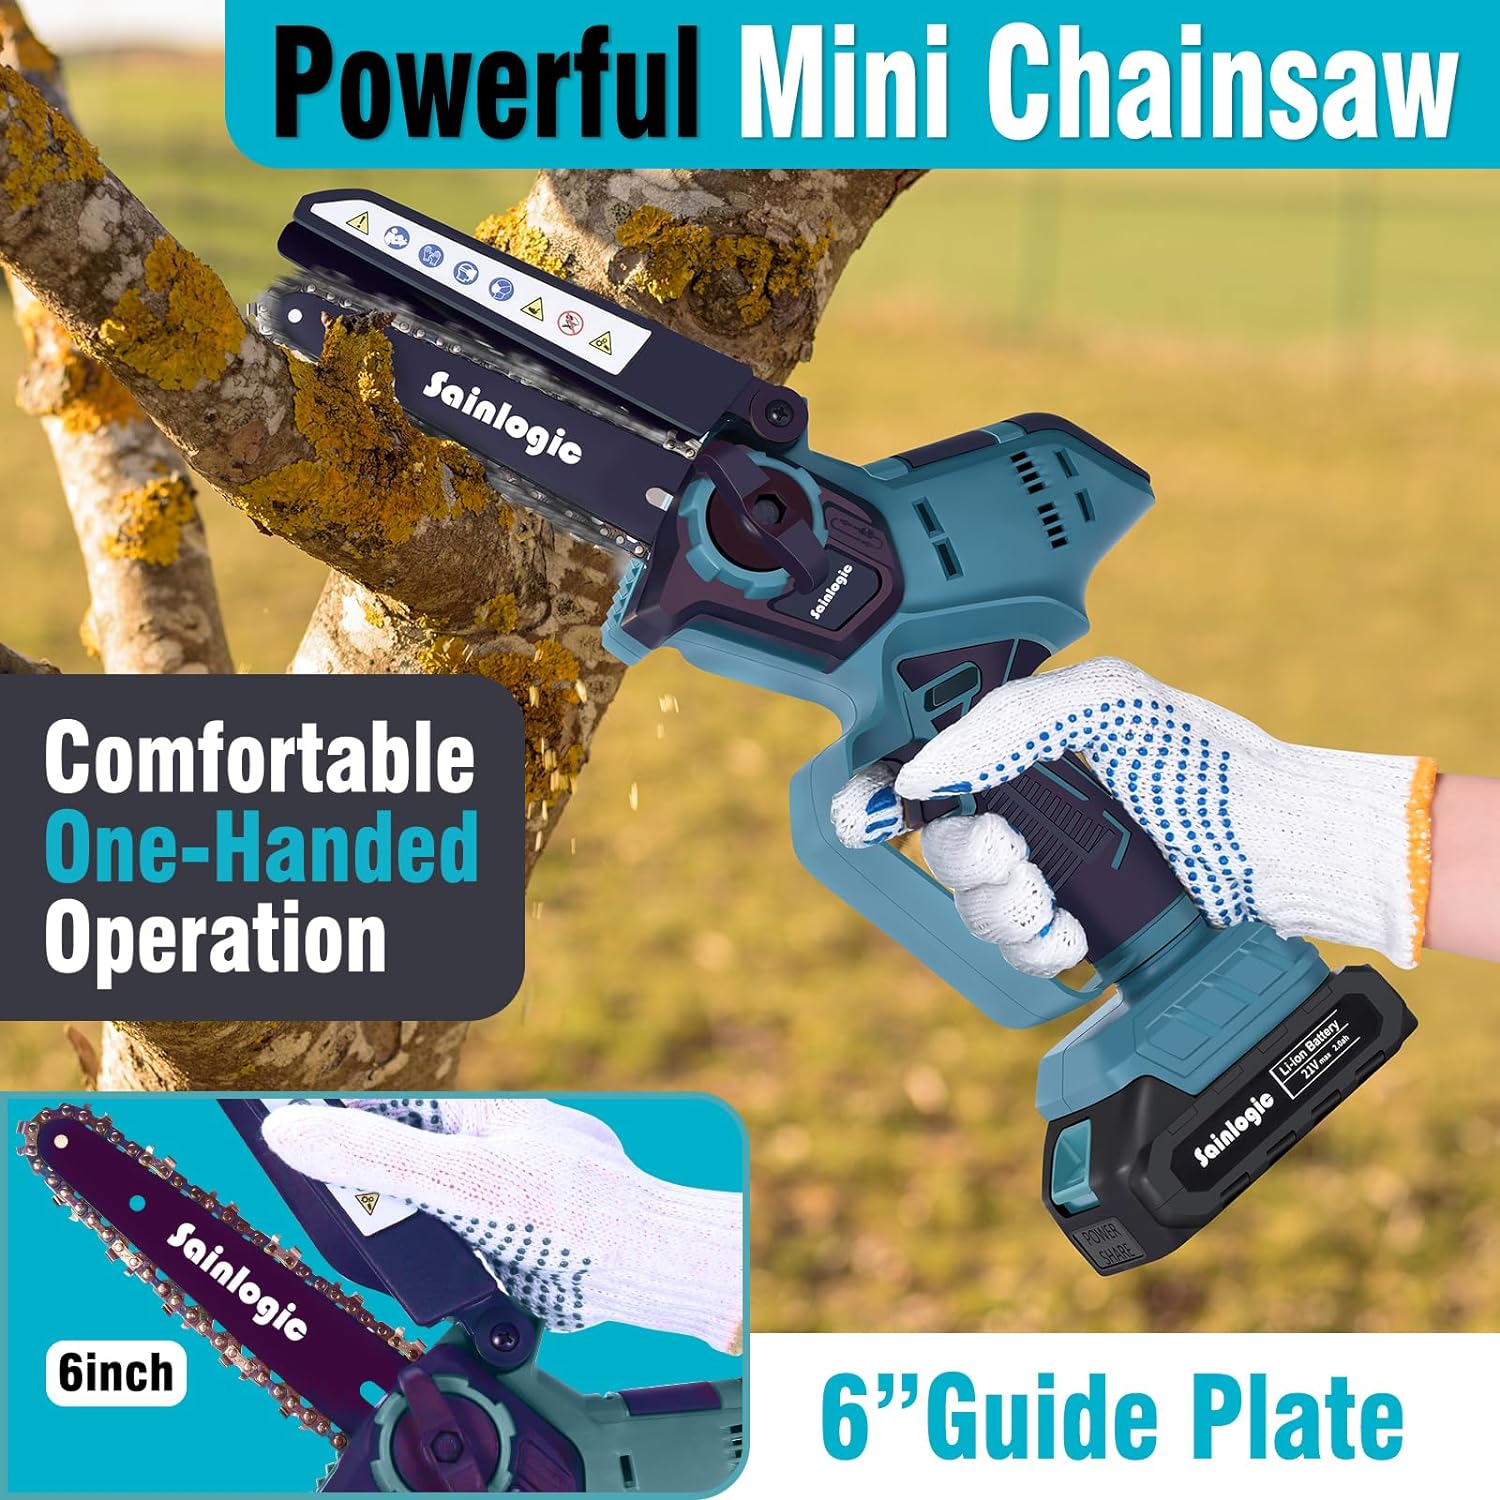 sainlogic Mini Chainsaw Cordless 6 Inch with 2 Batteries, Electric Handheld Chainsaw with Safety Lock, Portable Mini Chainsaw Battery for Garden Work and Tree Pruning